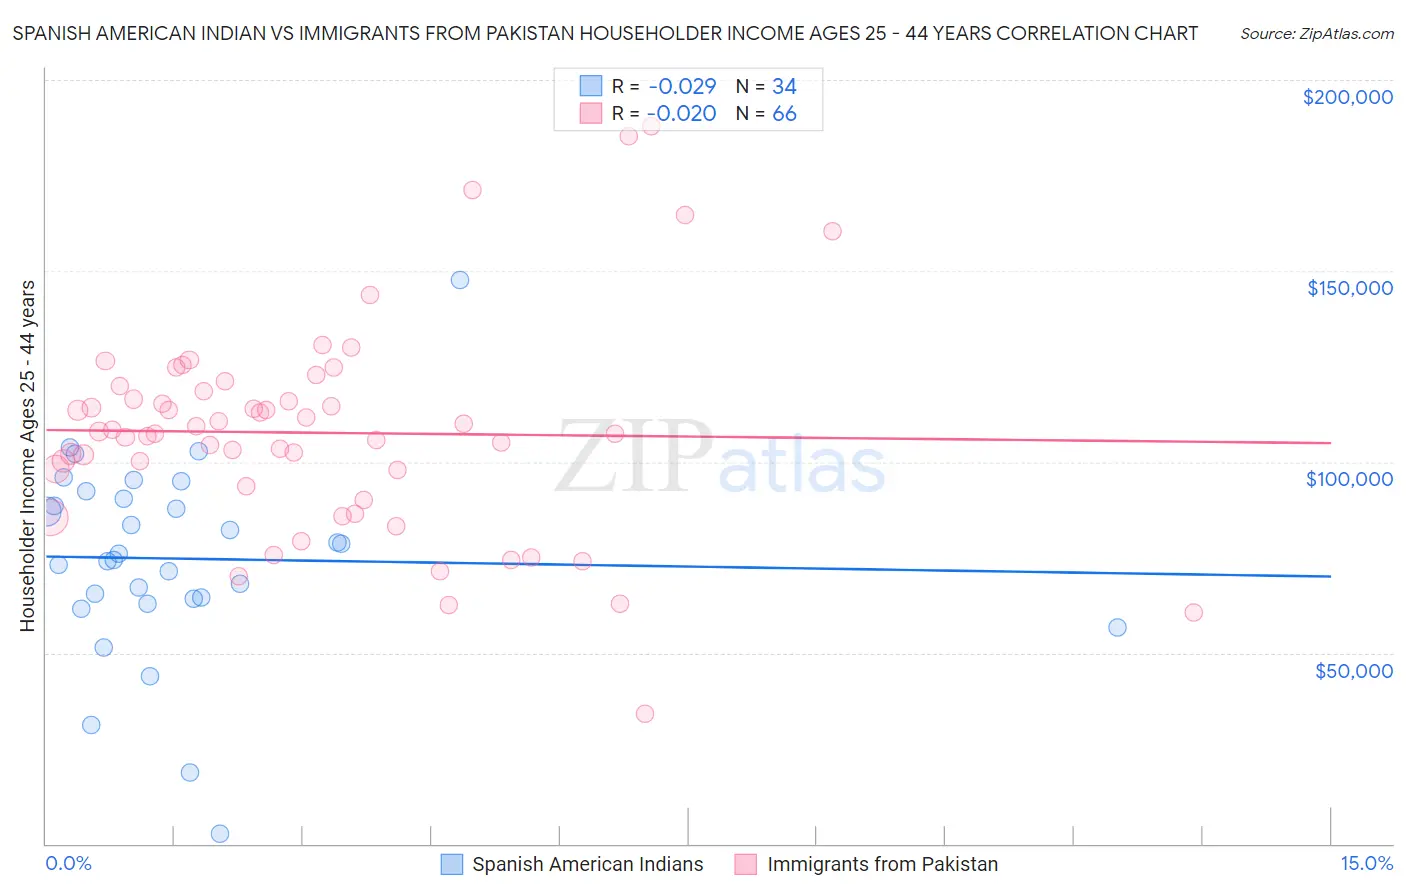 Spanish American Indian vs Immigrants from Pakistan Householder Income Ages 25 - 44 years